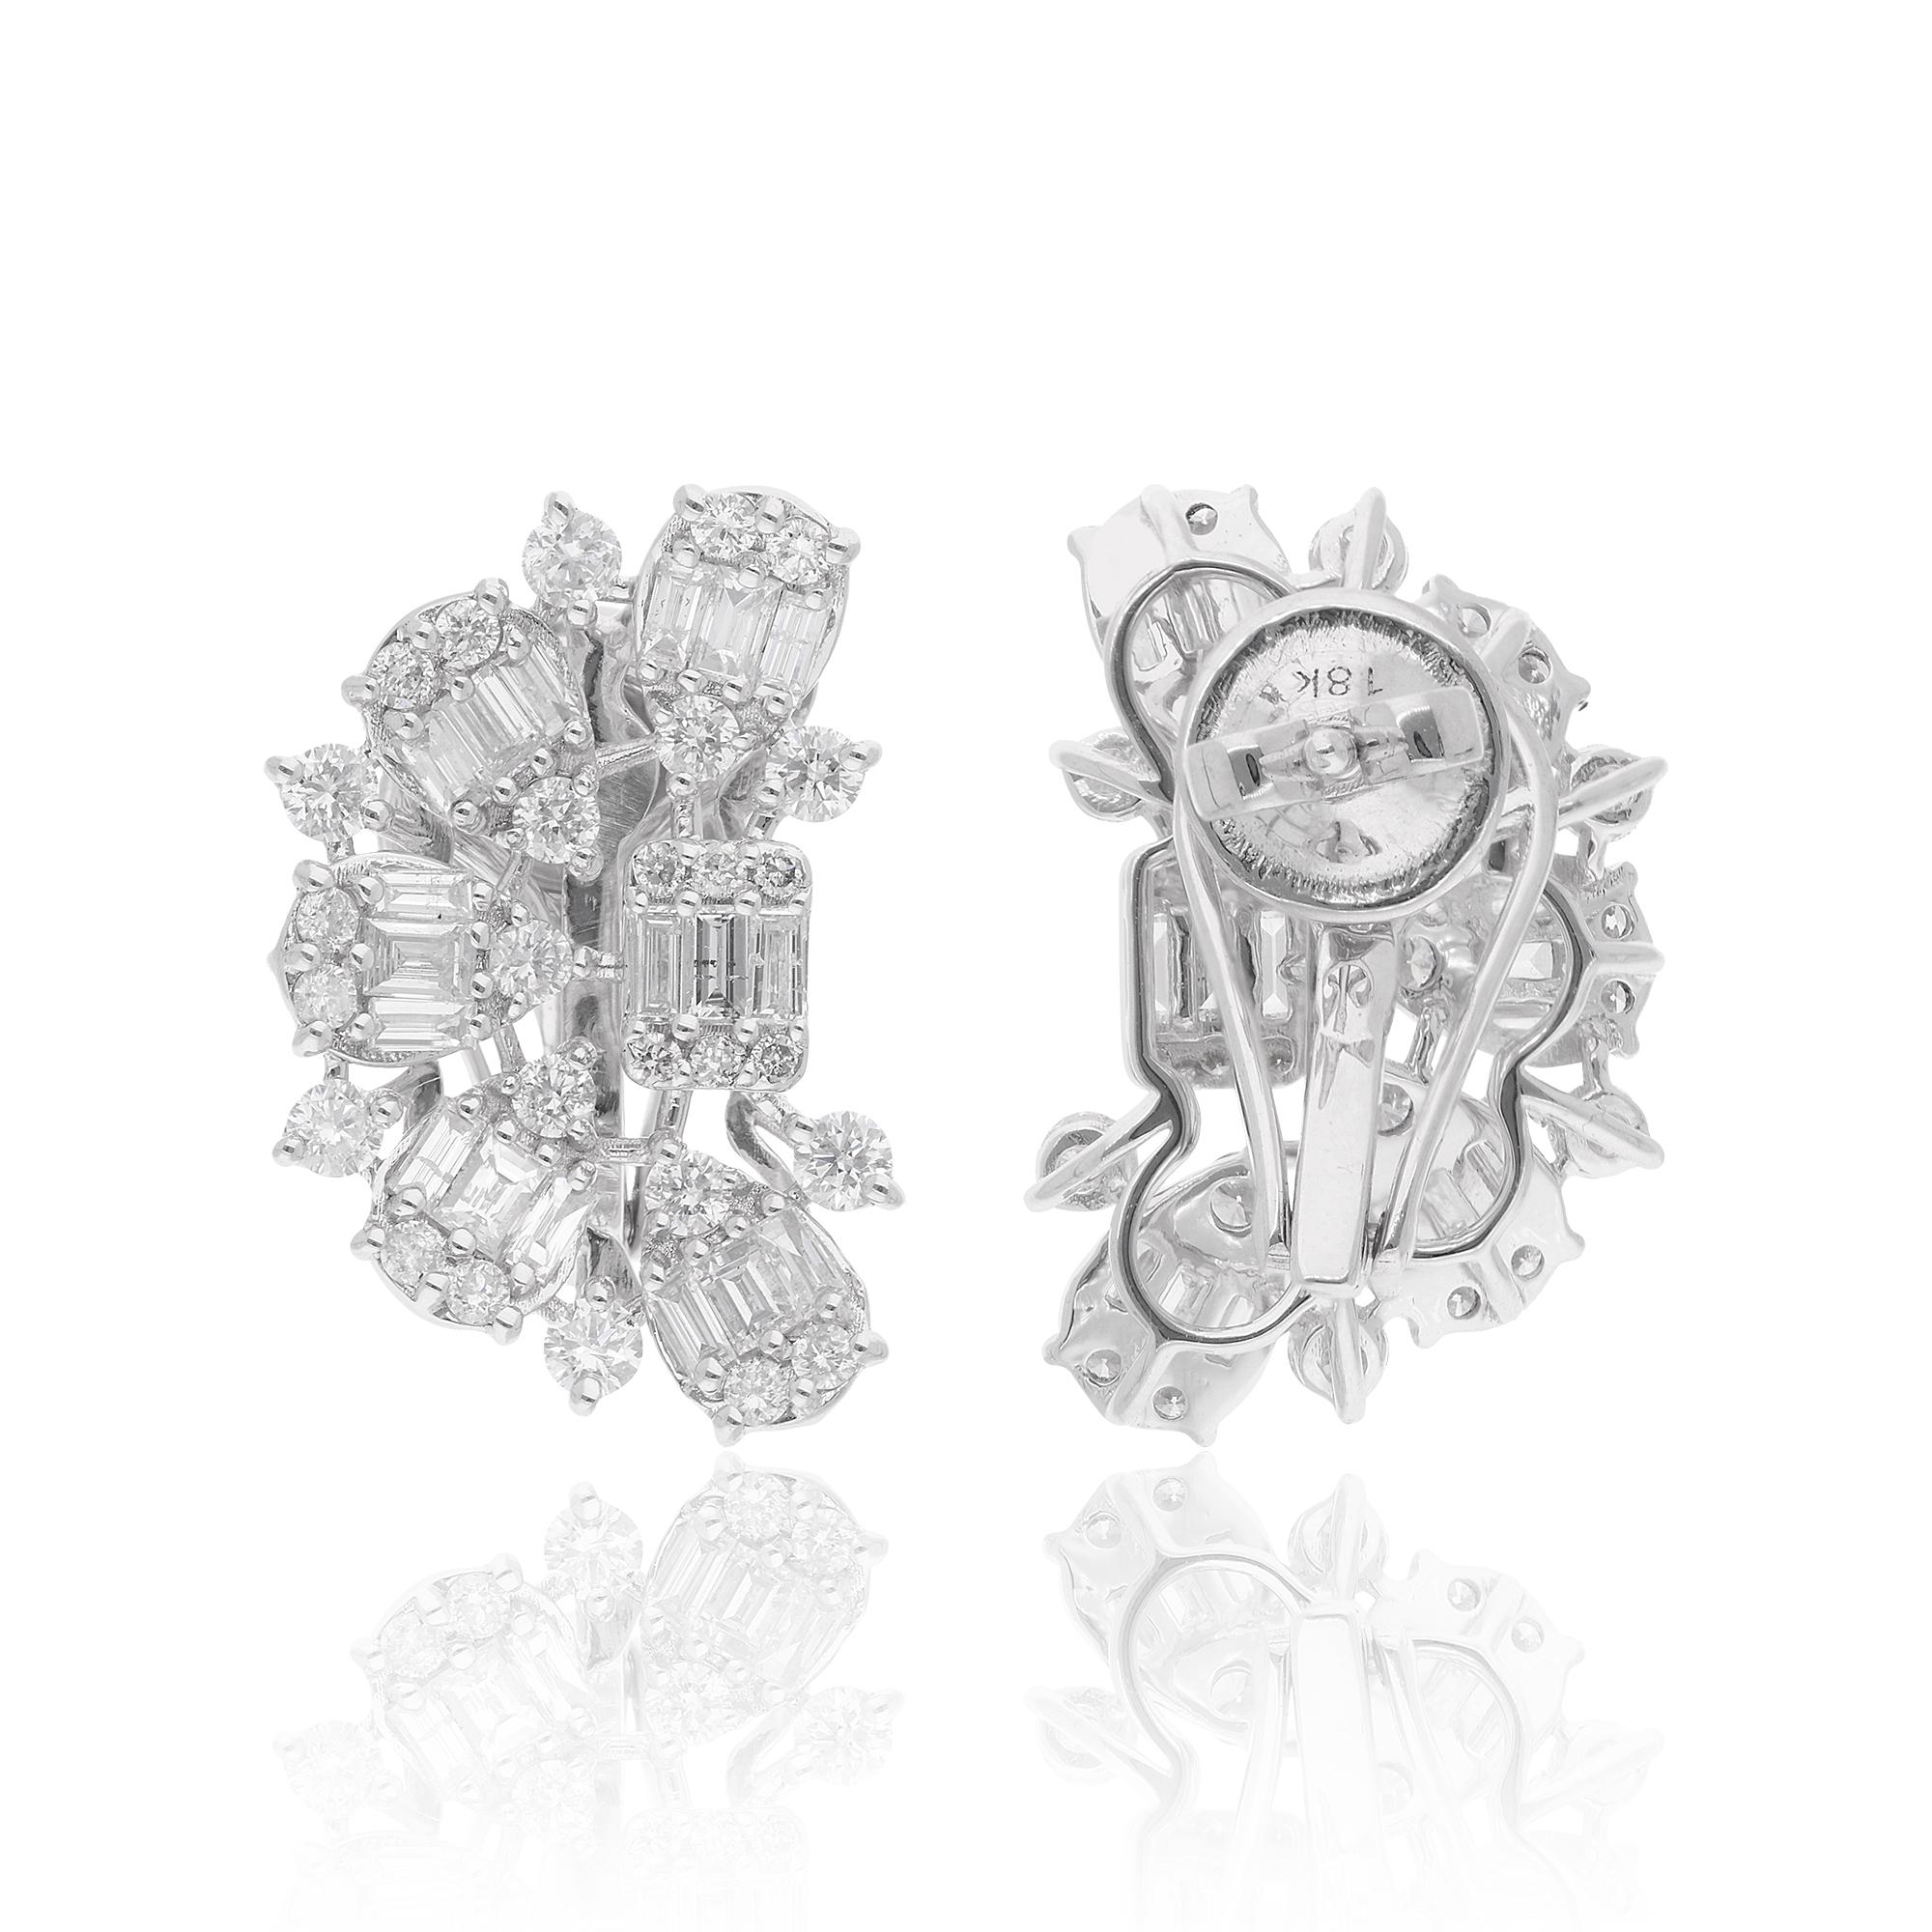 Enter the realm of timeless elegance with these exquisite 2 Carat Baguette & Round Diamond Earrings, meticulously crafted in lustrous 14 Karat White Gold. Handmade with precision and care, these stunning earrings are a celebration of sophistication